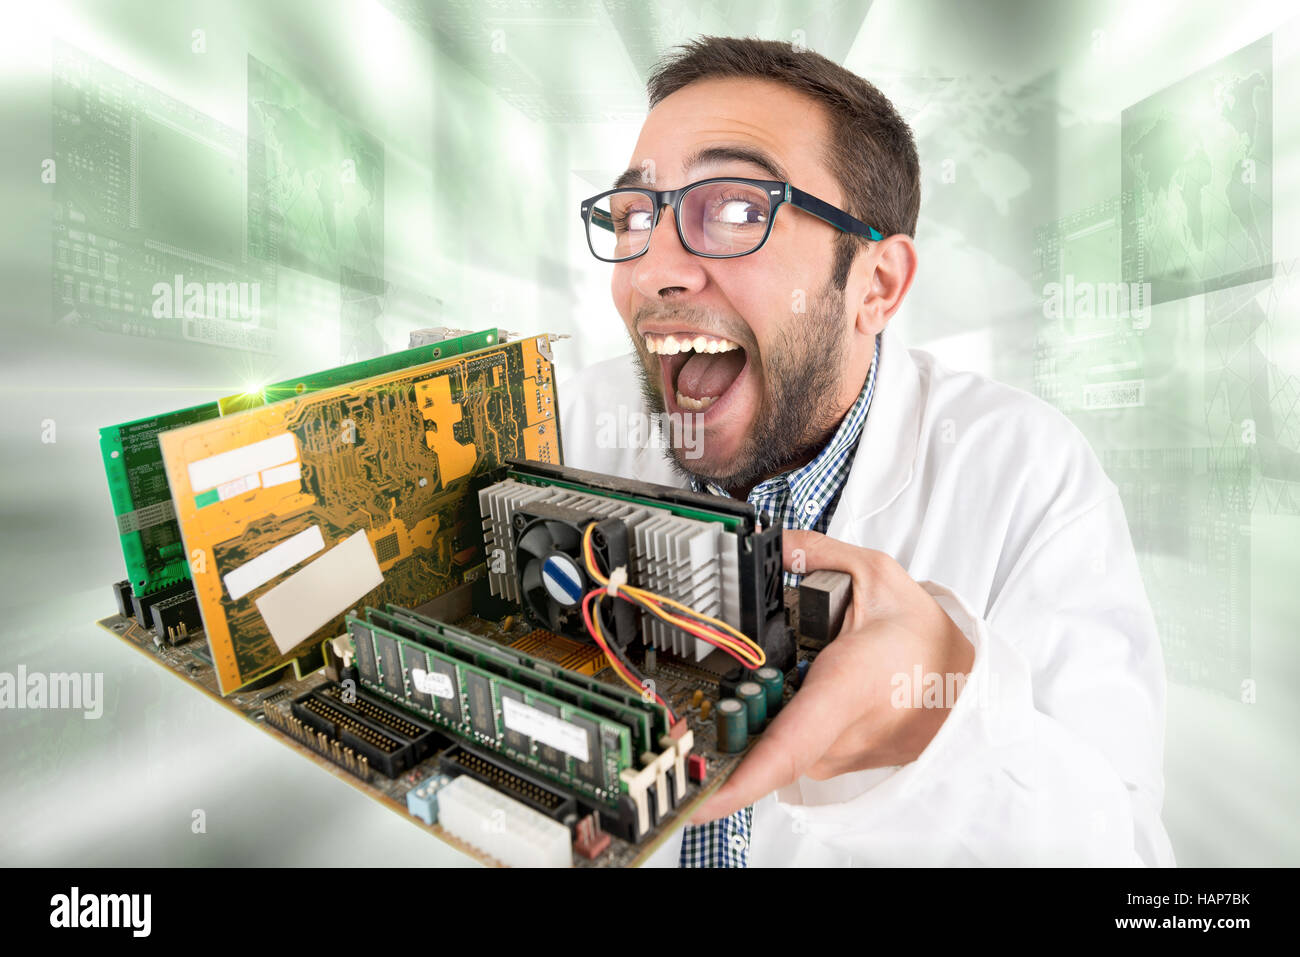 Nerd engineer posing with computer components Stock Photo